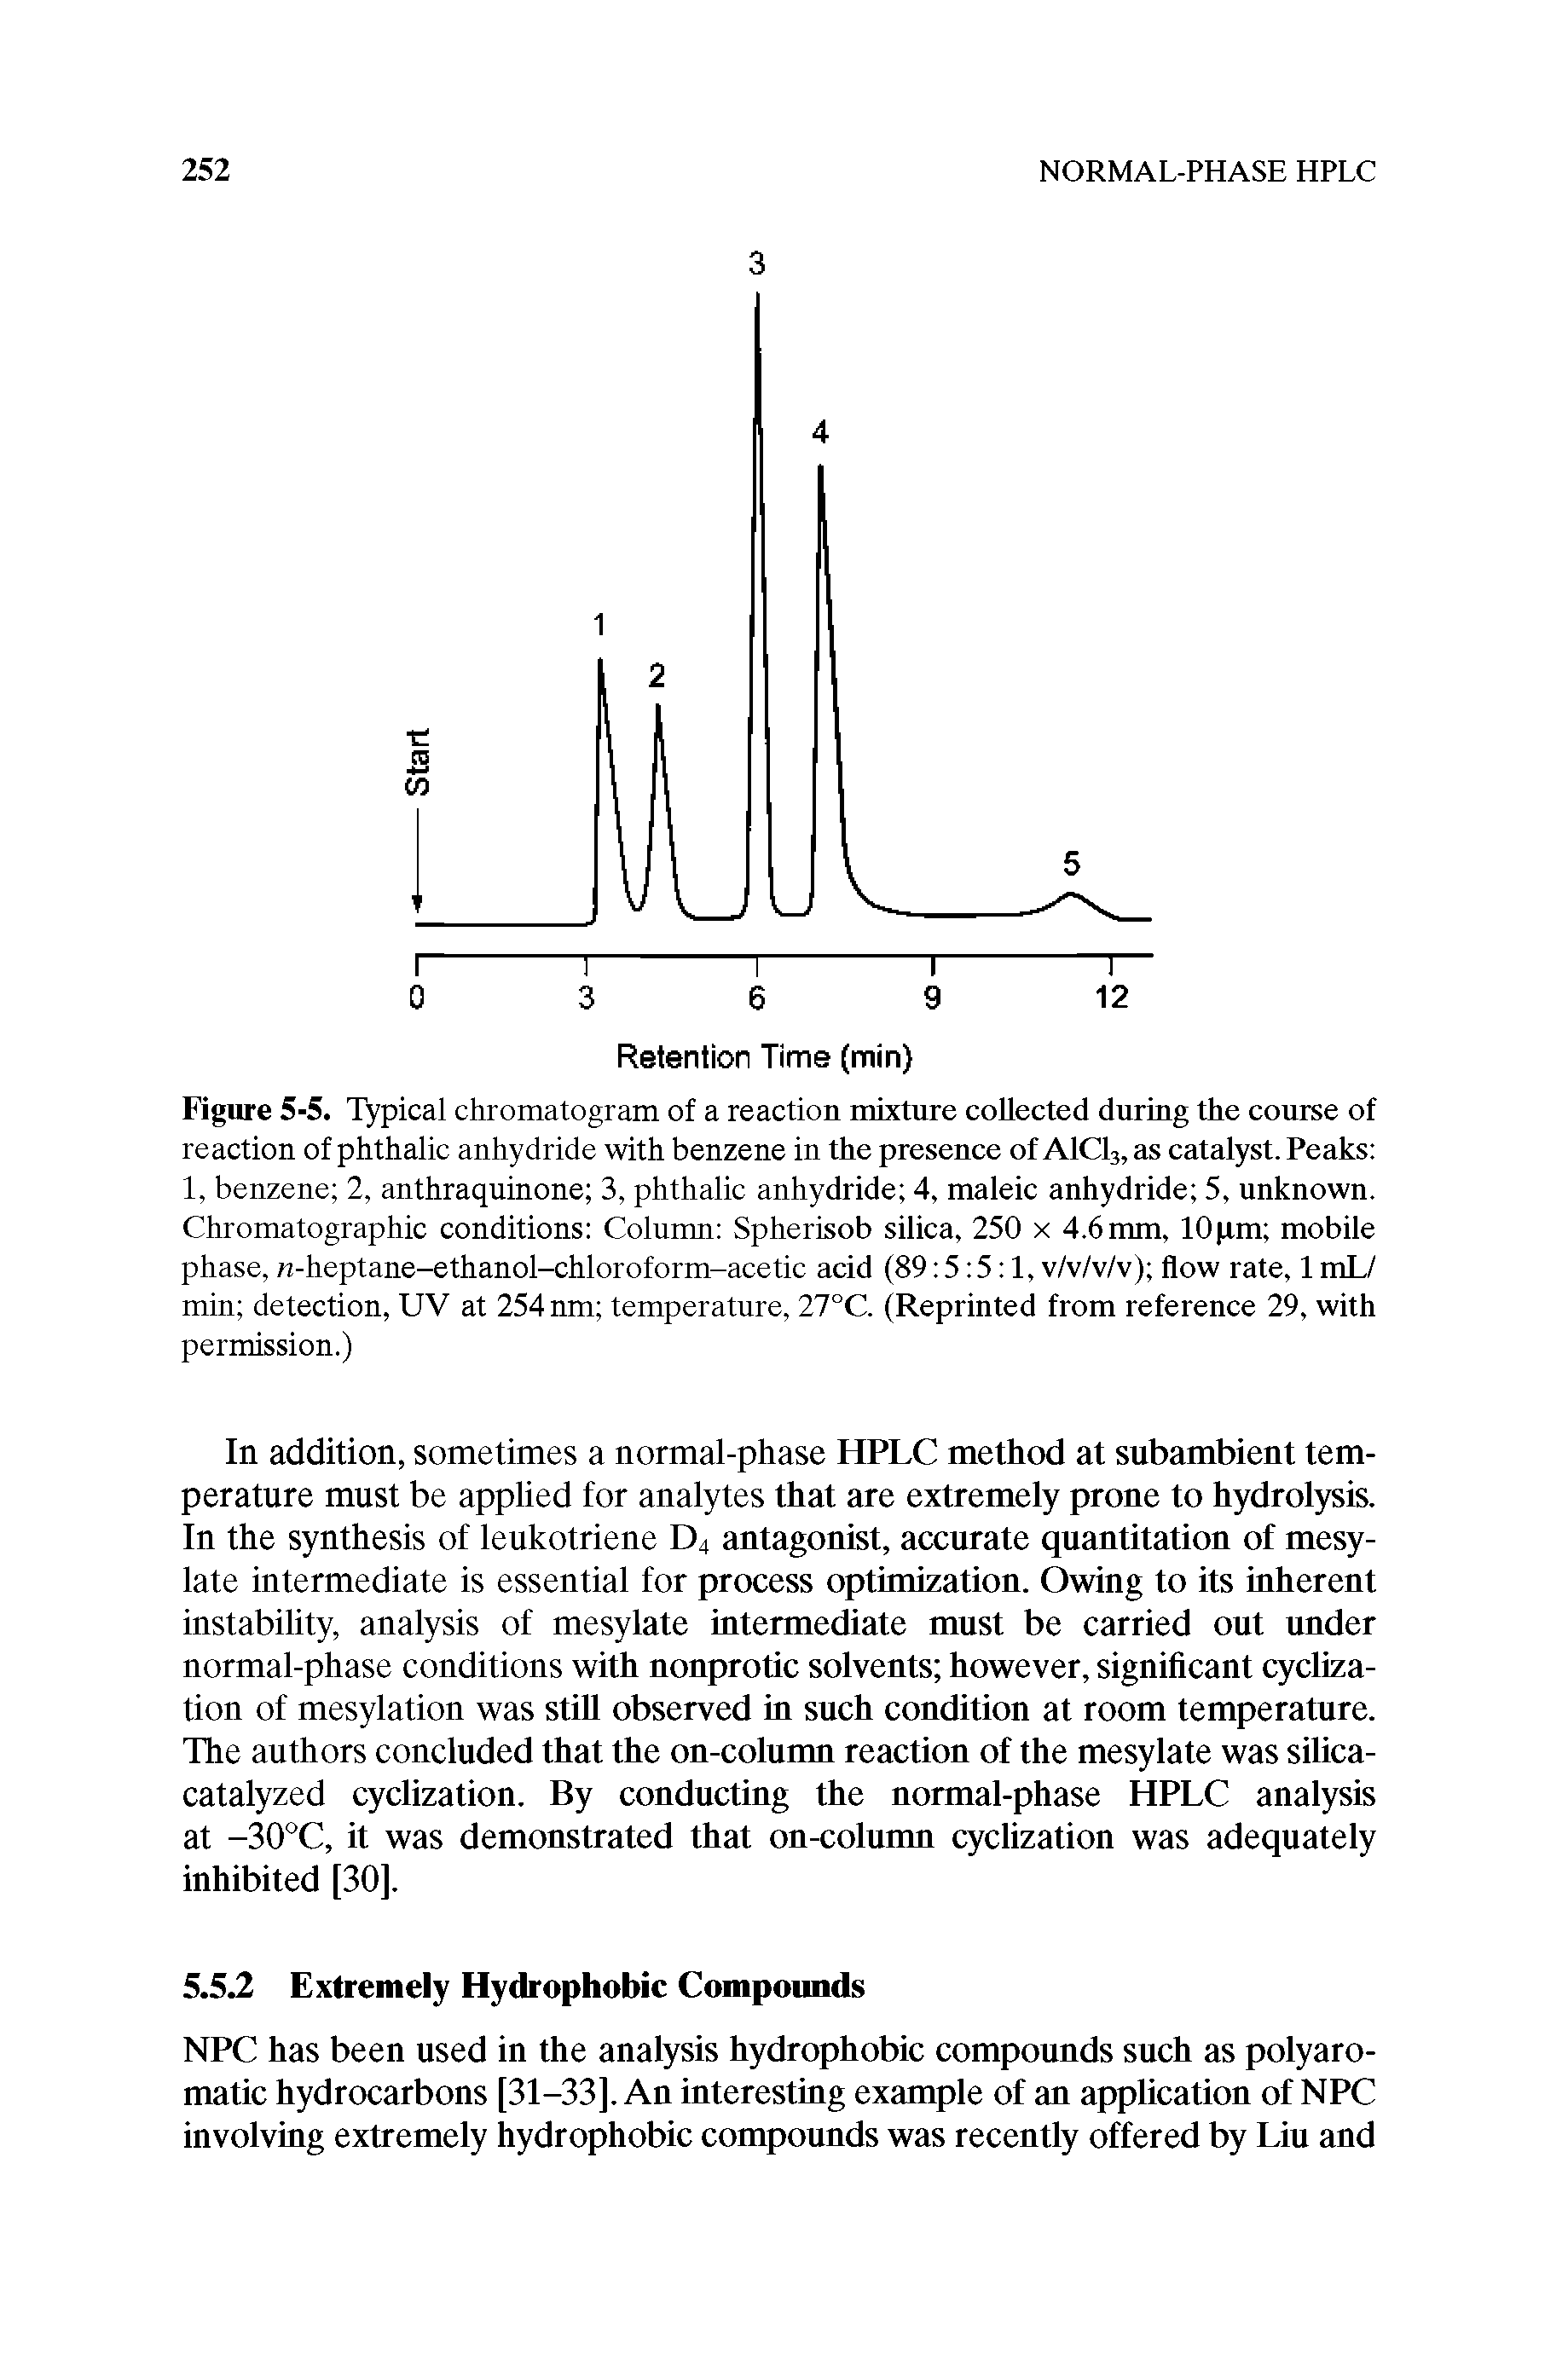 Figure 5-5. Typical chromatogram of a reaction mixture collected during the course of reaction of phthalic anhydride with benzene in the presence of AICI3, as catalyst. Peaks 1, benzene 2, anthraquinone 3, phthalic anhydride 4, maleic anhydride 5, unknown. Chromatographic conditions Column Spherisob silica, 250 x 4.6mm, 10pm mobile phase, -heptane-ethanol-chloroform-acetic acid (89 5 5 1, v/v/v/v) flow rate, 1 mL/ min detection, UV at 254 nm temperature, 27°C. (Reprinted from reference 29, with permission.)...